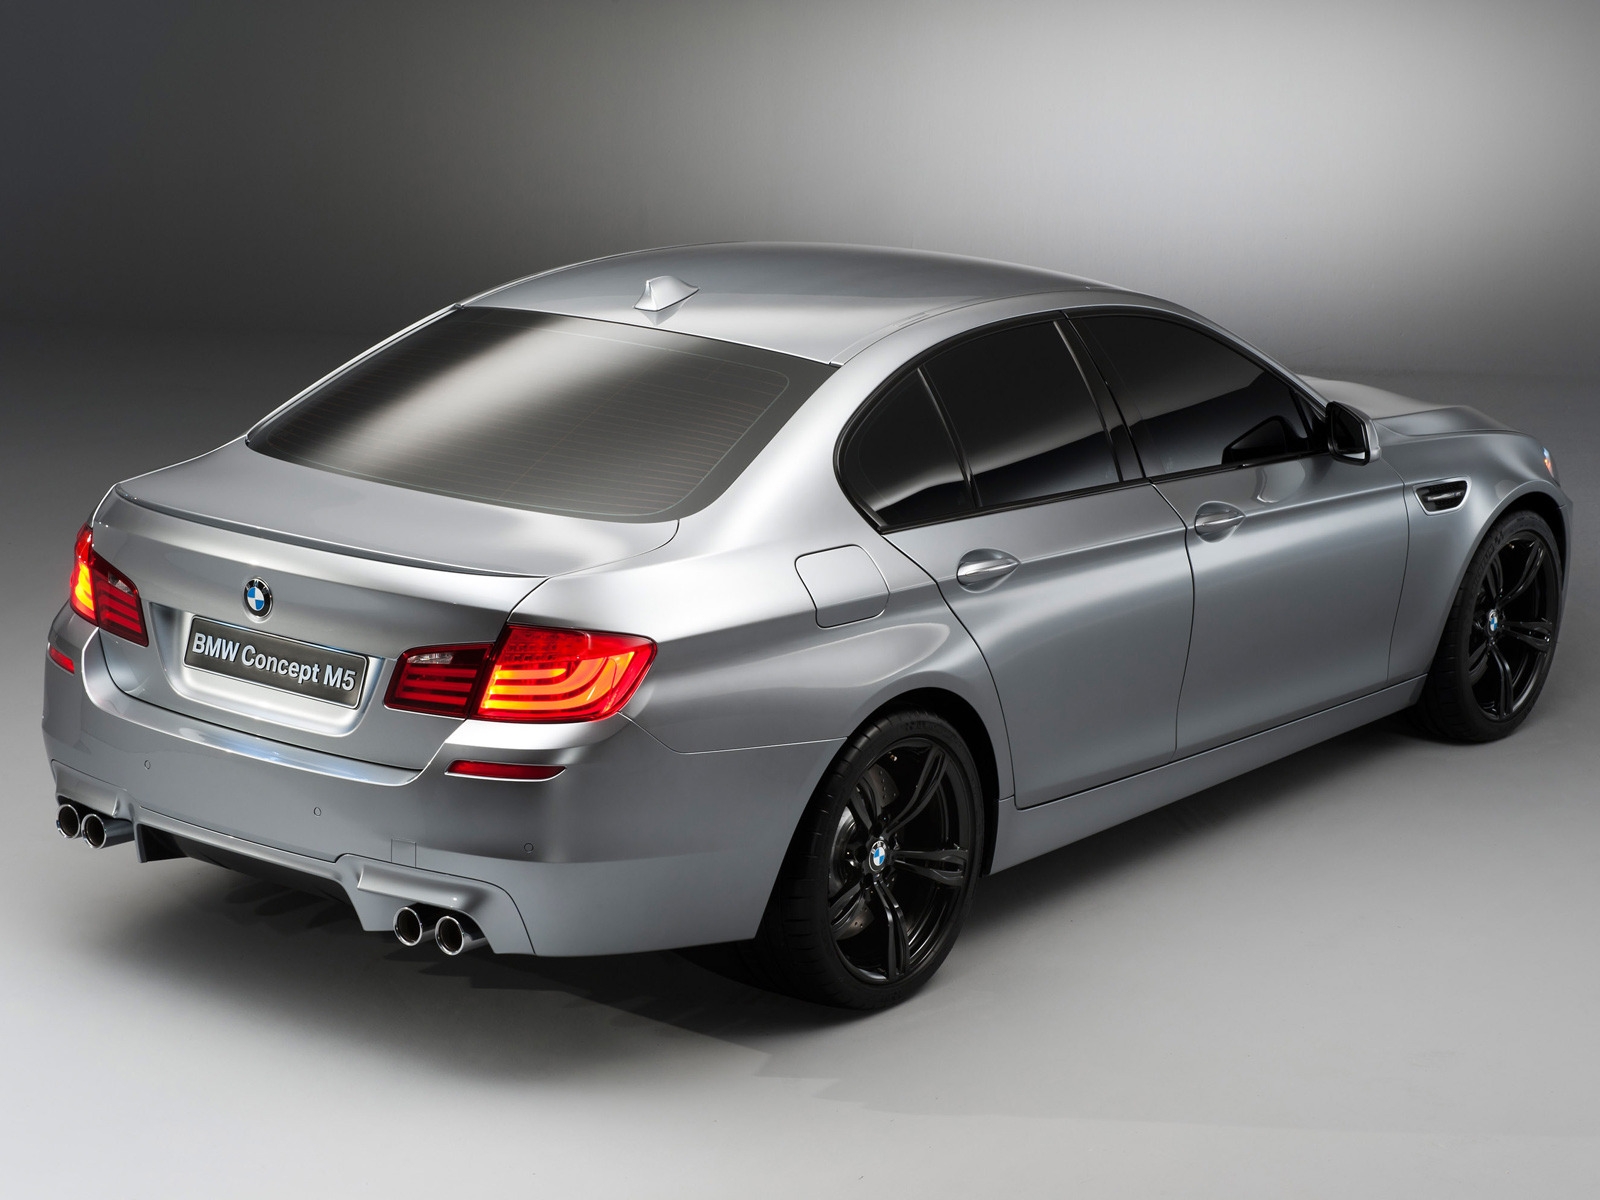 BMW M5 Concept 2012 Side and Rear for 1600 x 1200 resolution